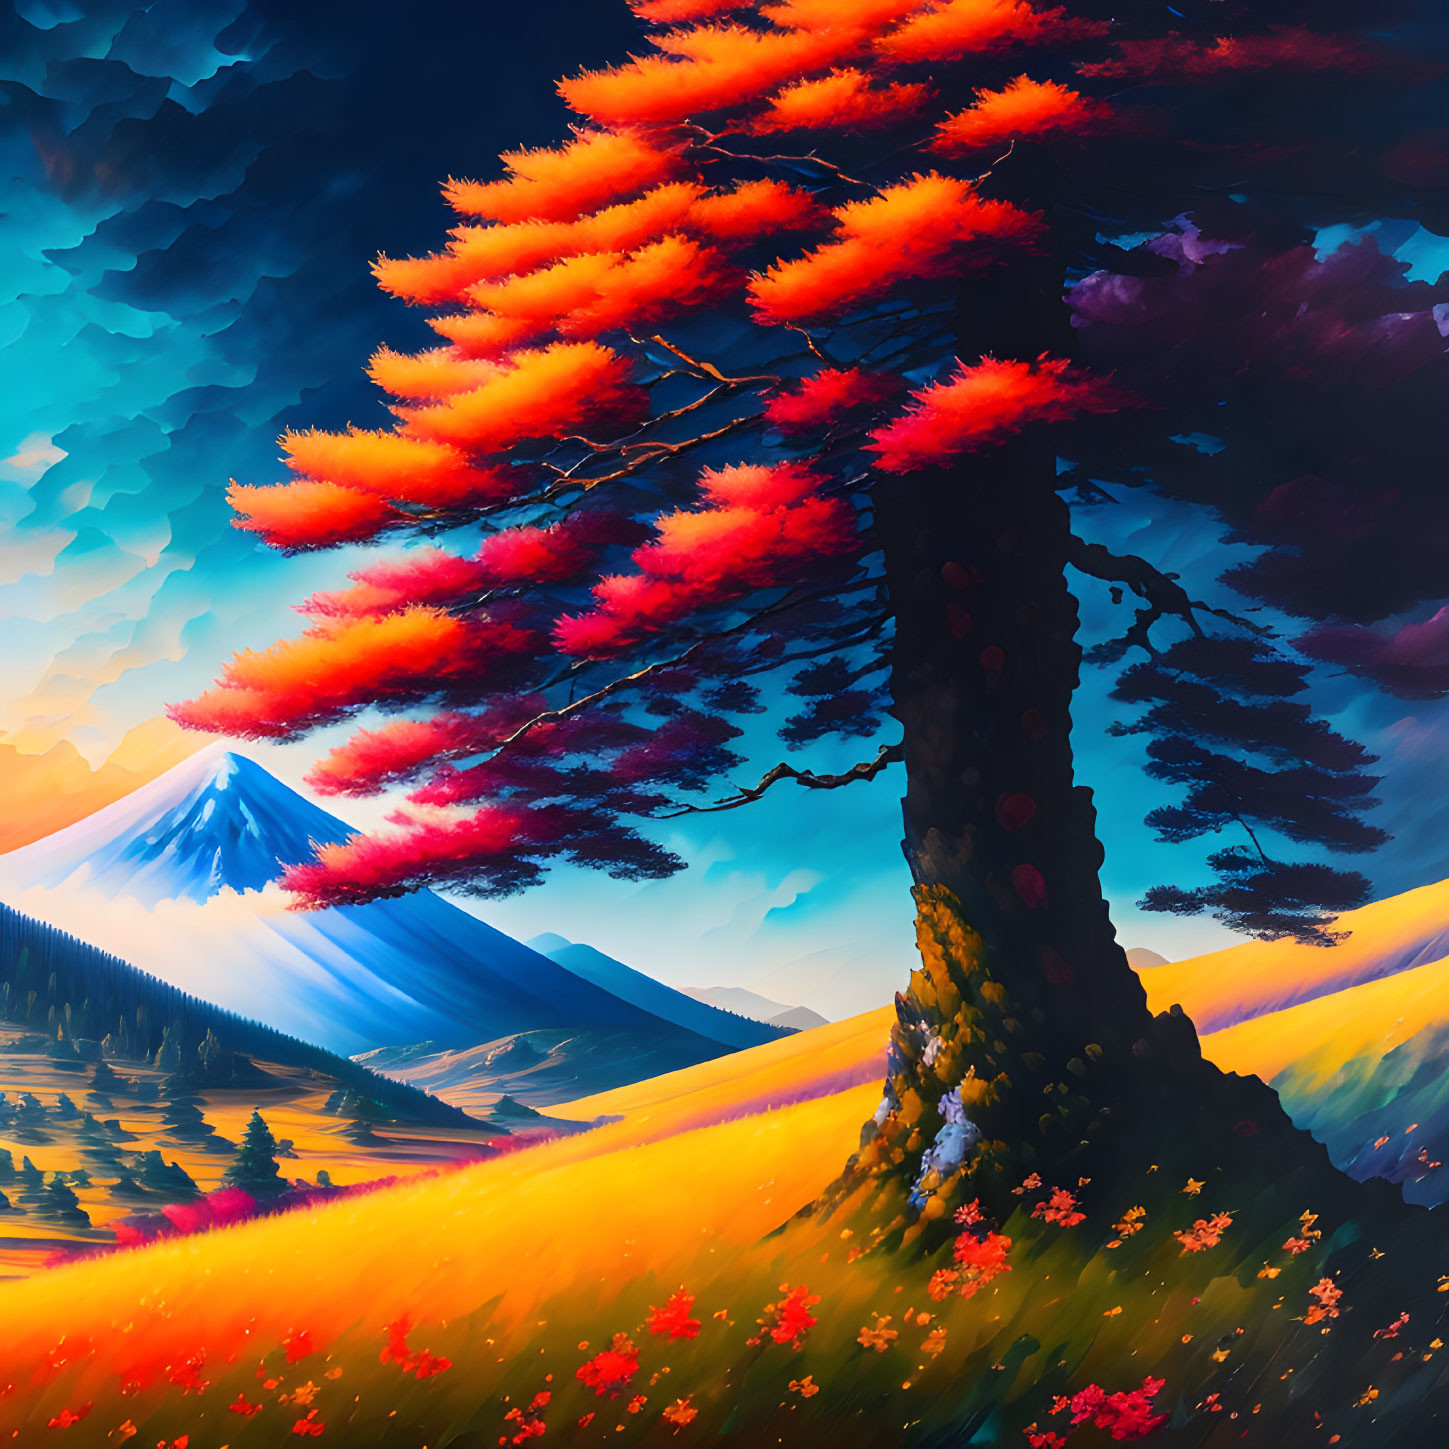 Vibrant digital painting of lone tree with fiery orange leaves against mountain backdrop